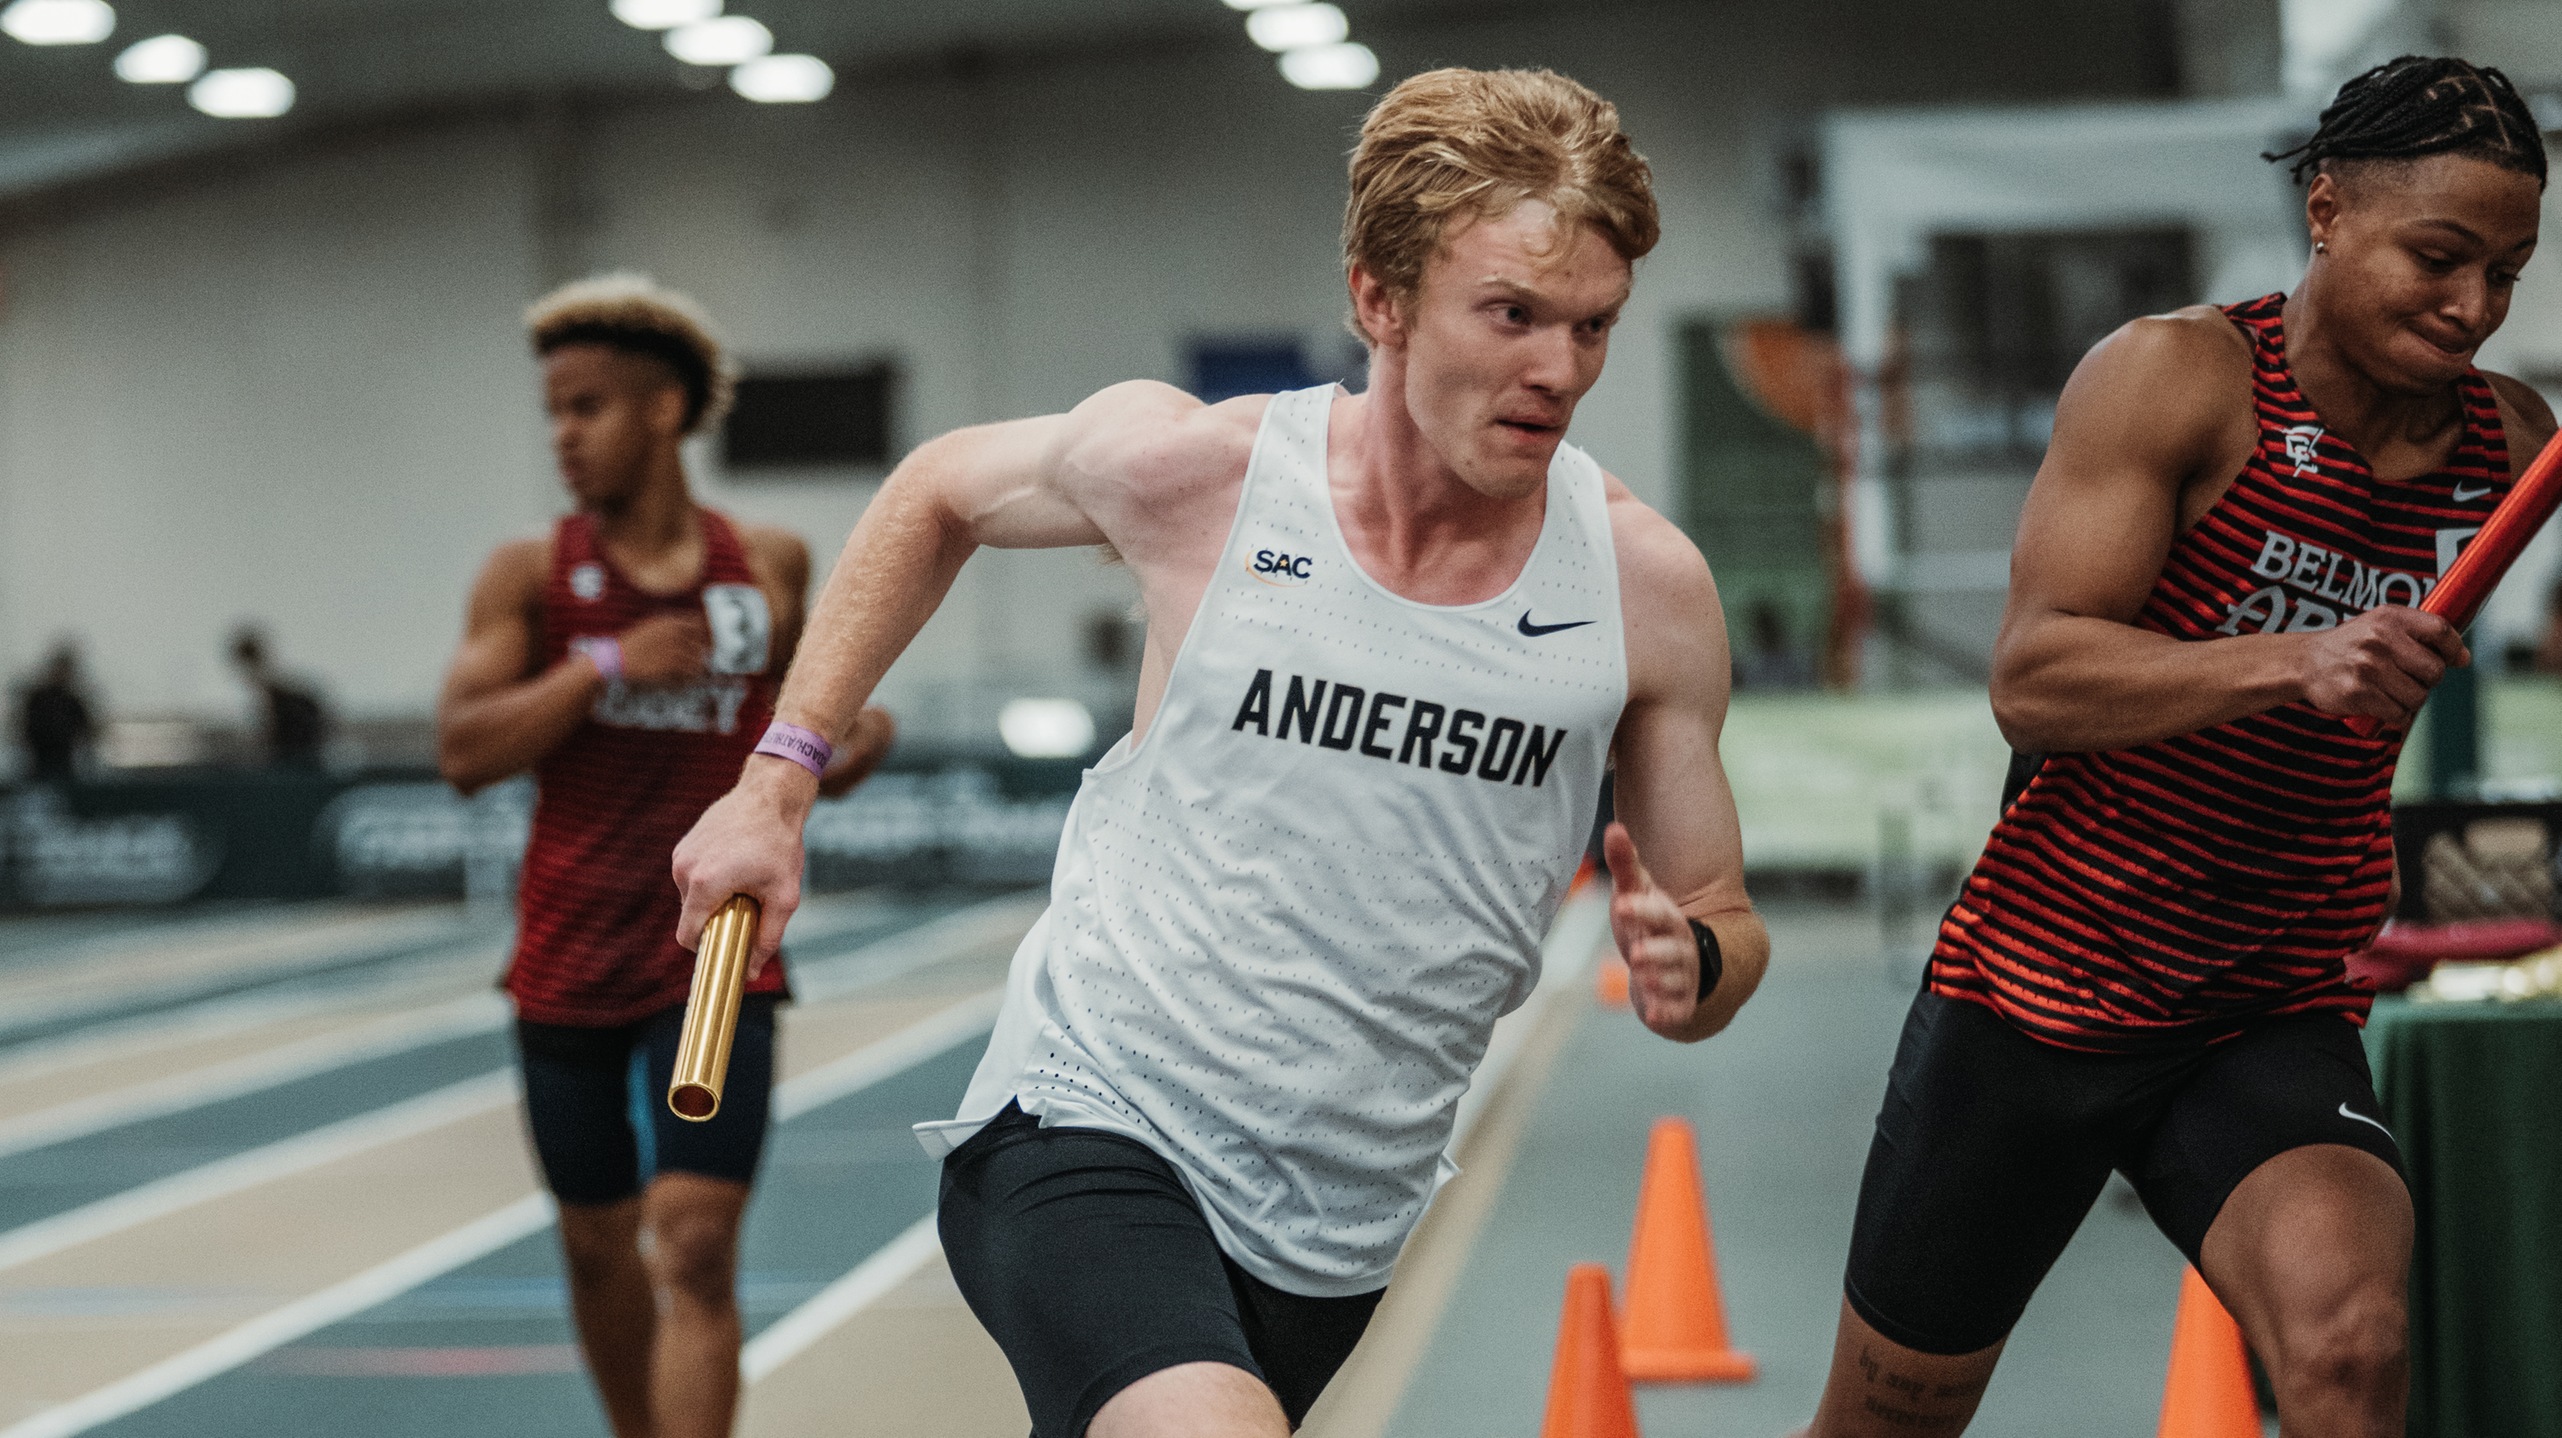 Track and Field Set for Challenging Competition at Carolina Challenge